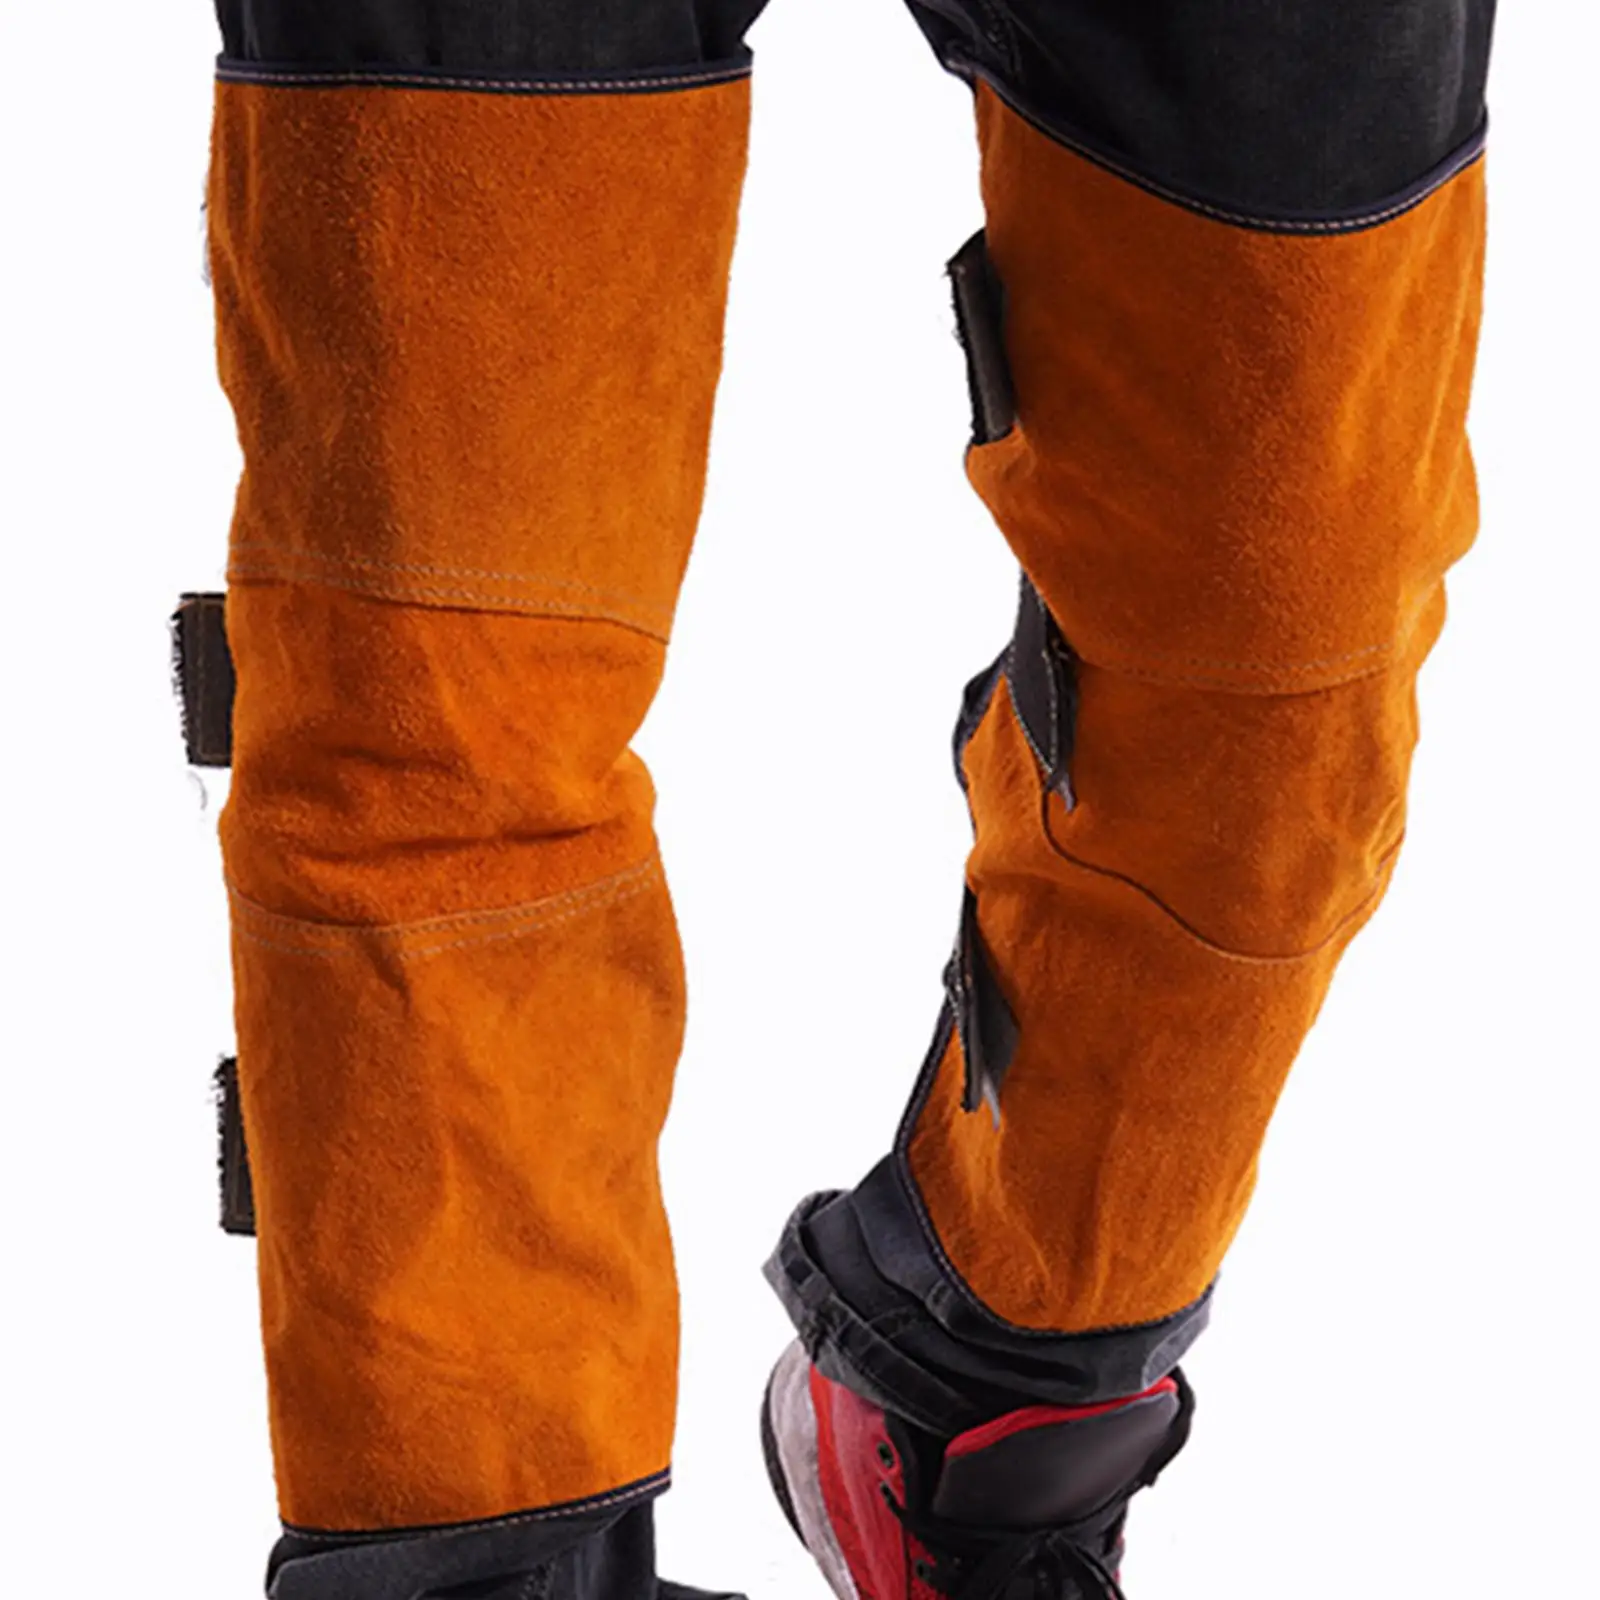 Welding Leg Covers Heat Resistant Fireproof Comfortable Anti Slip Abrasion Resistant Knee Protector Knee Pads Leg Protection